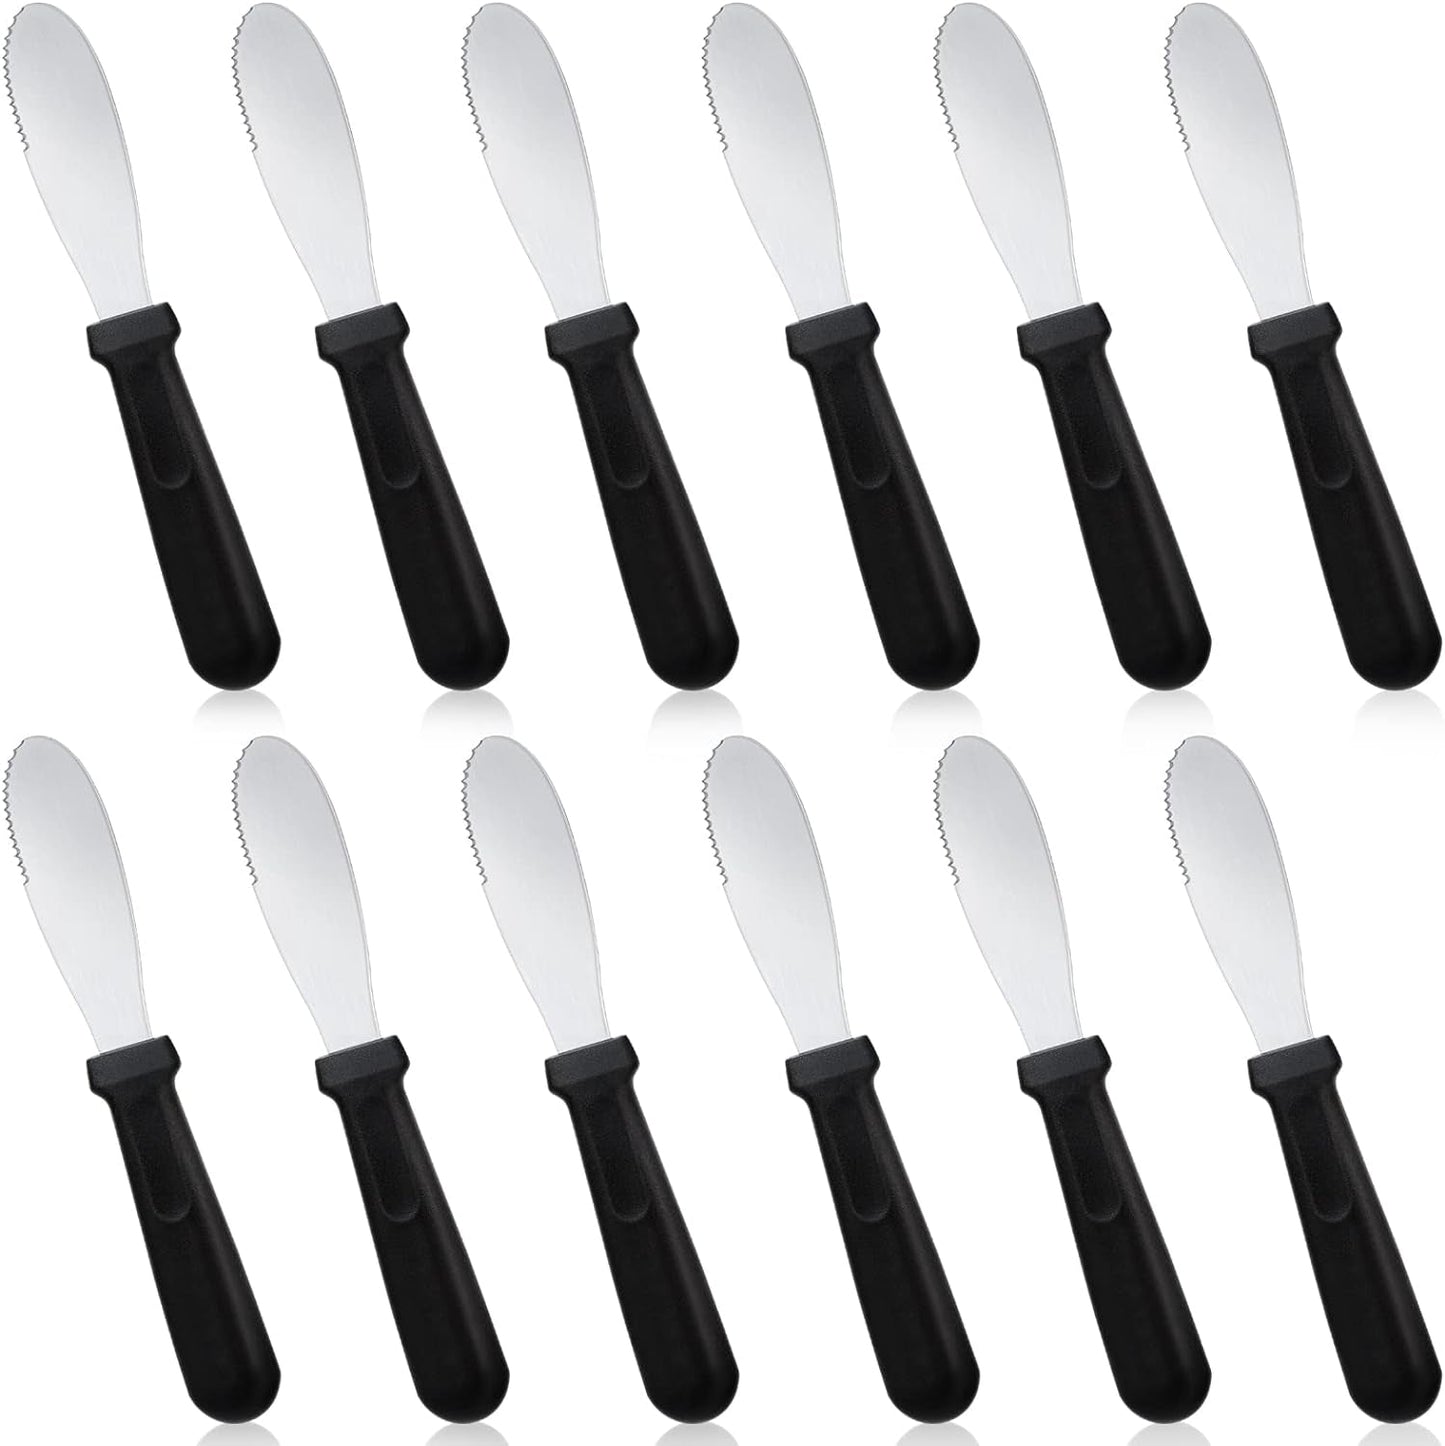 12 Pcs Butter Spreader Knives Wide Blade Stainless Steel Cheese Spreader Knife Black Plastic Handle Slicing or Spreading Knife for Slicing Bread Cream Sandwich Condiment Spreader Kitchen 9.1 Inch  Cunno   